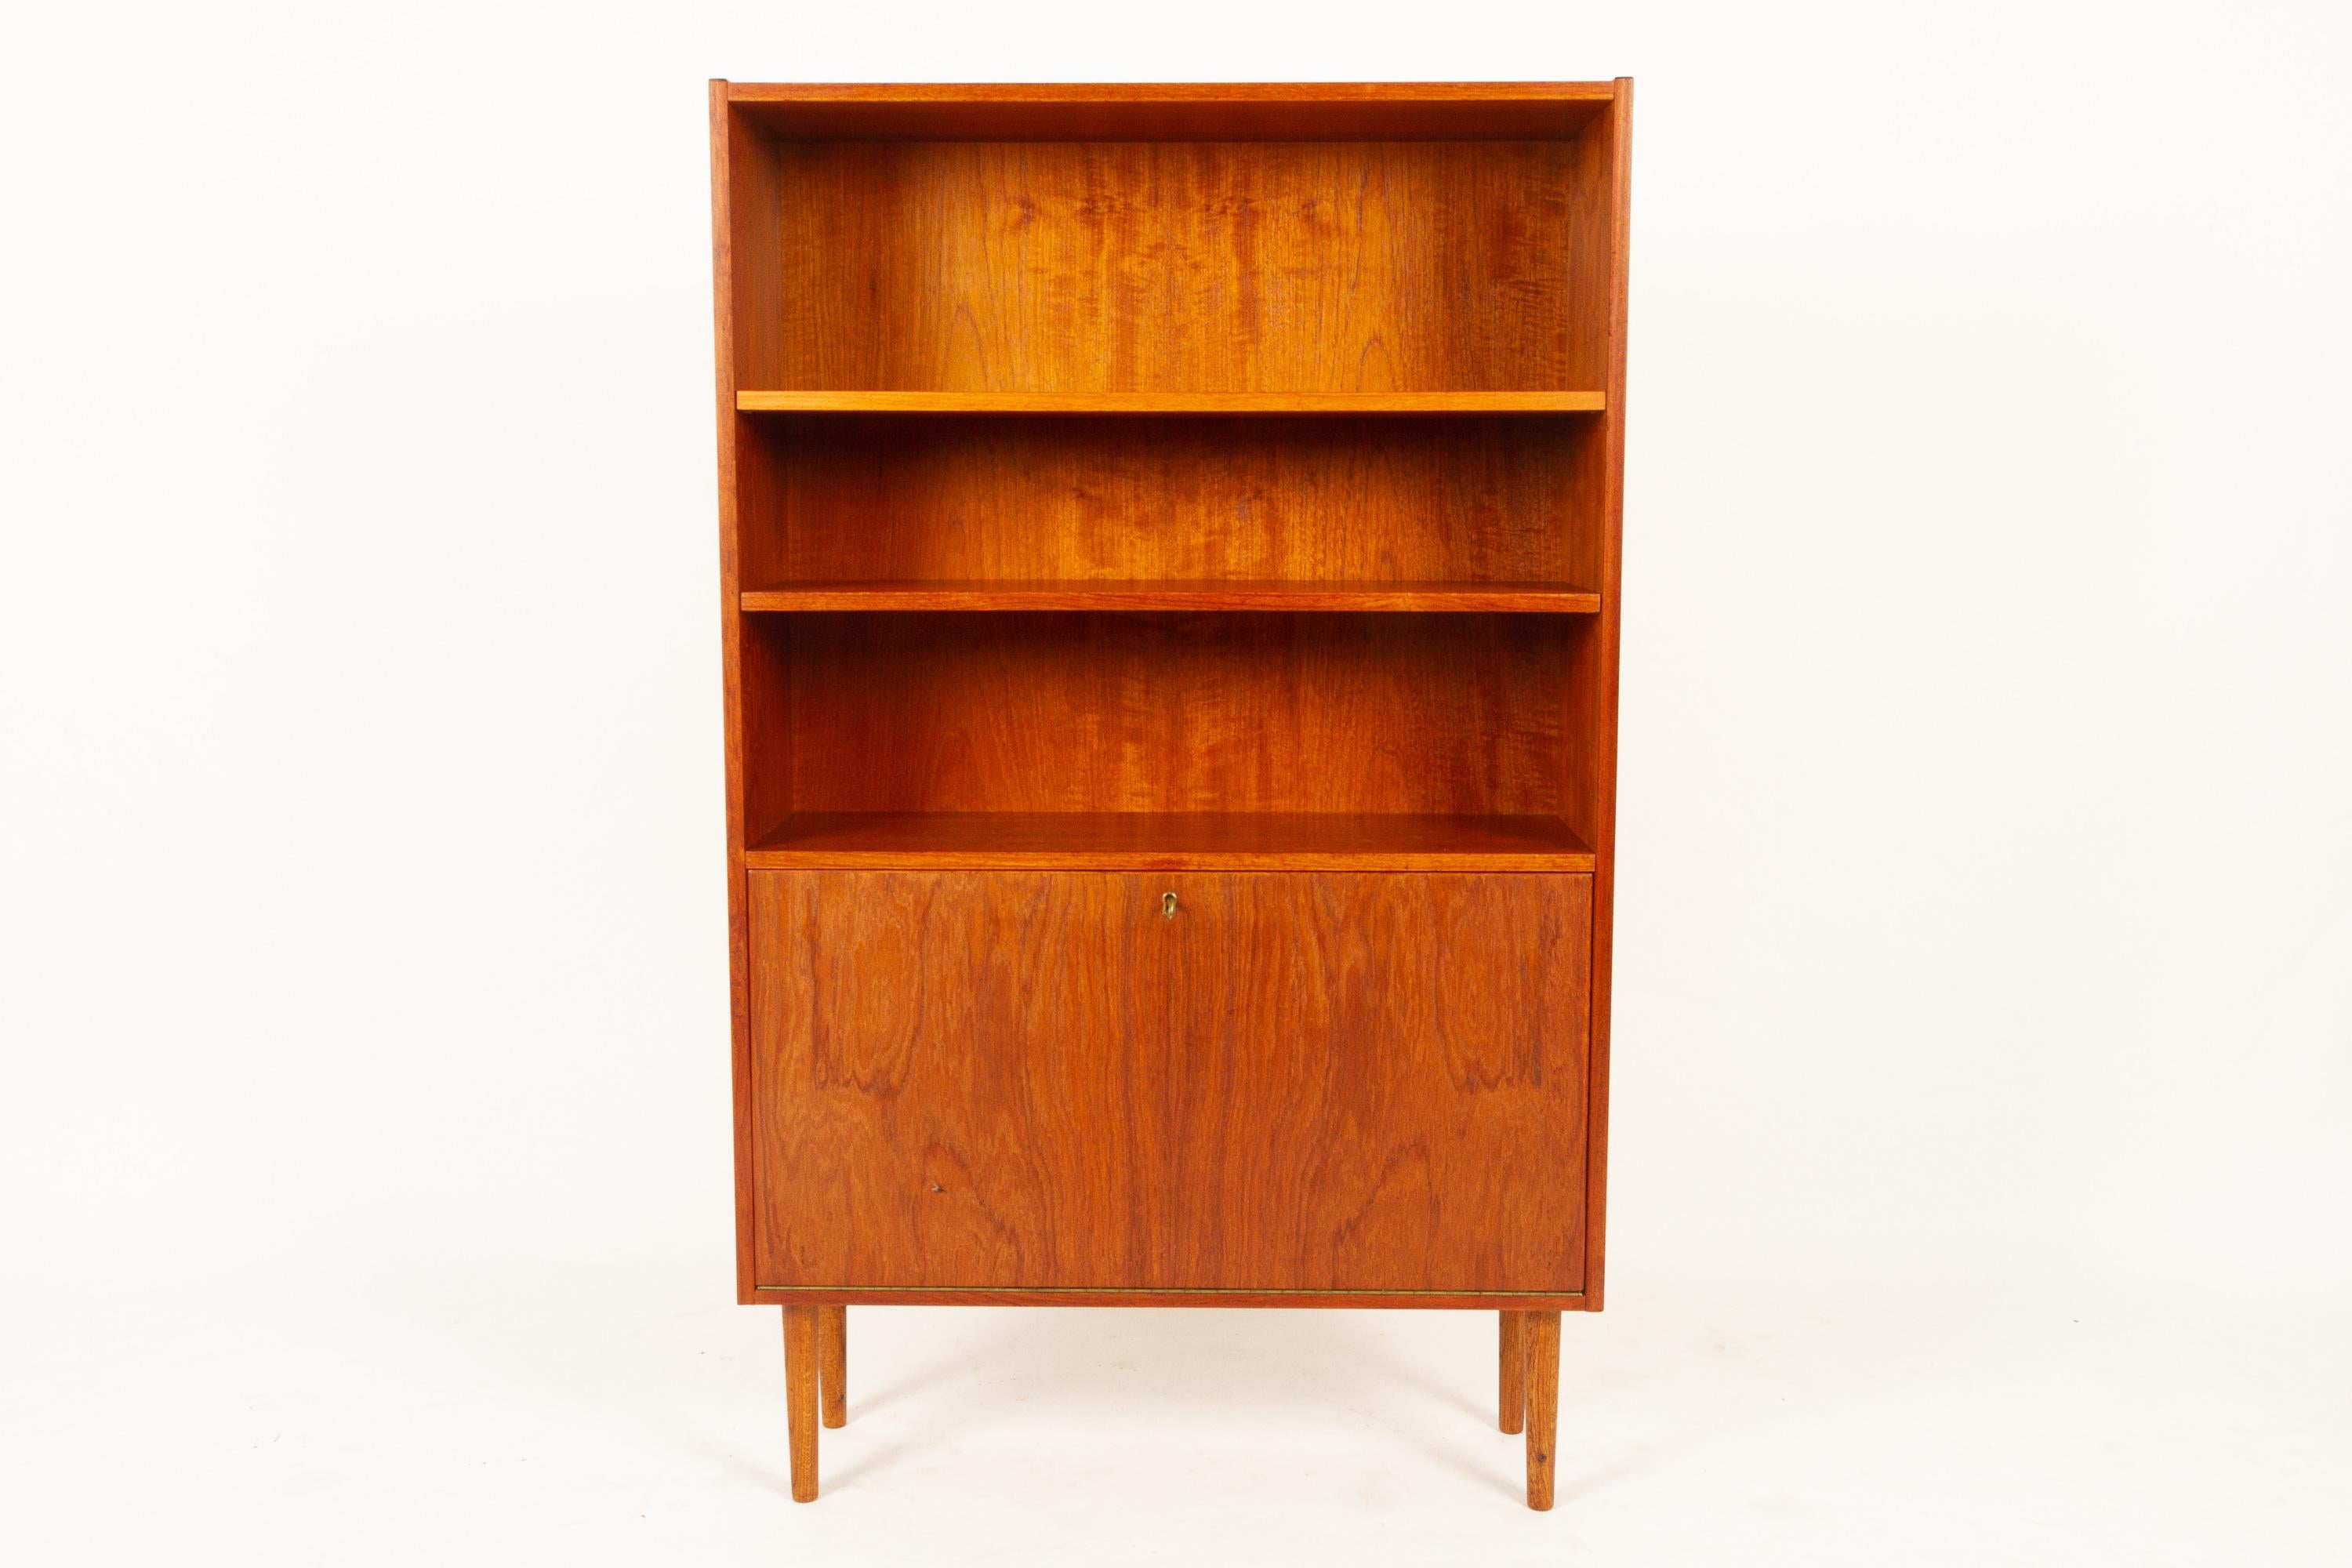 Danish teak bookcase, 1960s.
Elegant slender bookcase in teak veneer. Two adjustable shelves and one cabinet with drop down door. Door has a lock with key. Standing on round tapered legs in stained oak (not original).
Good vintage condition,